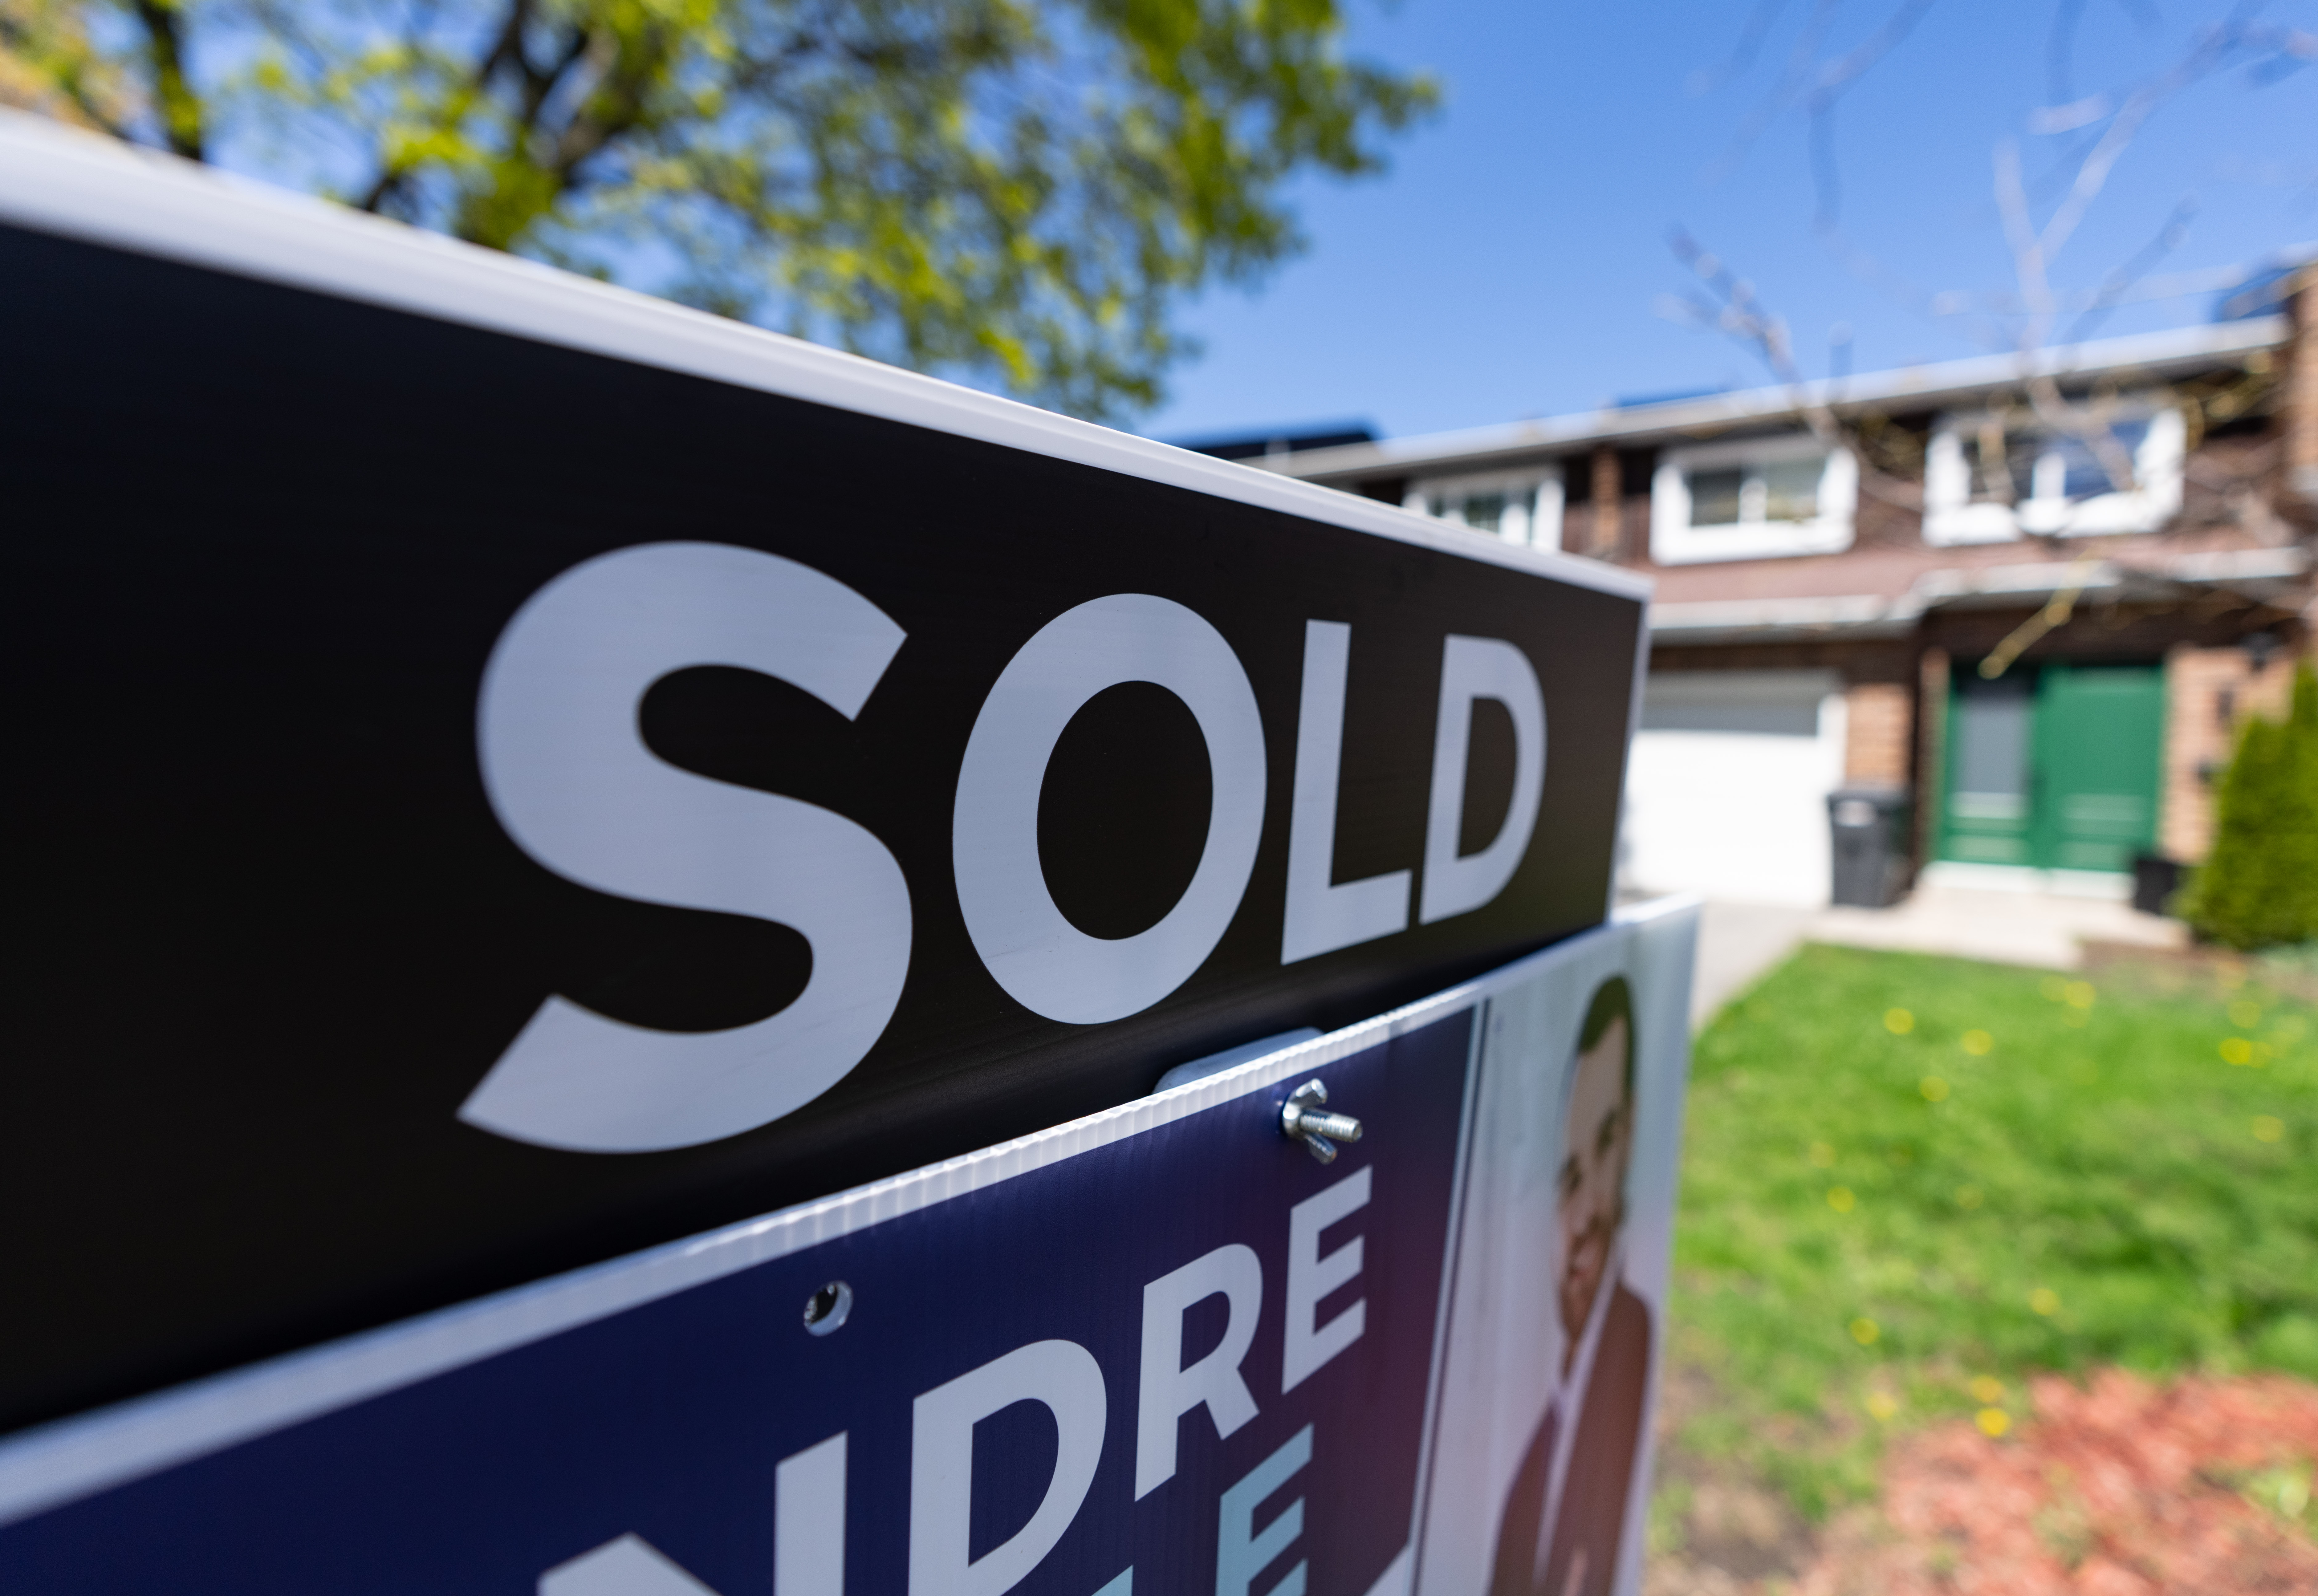 May was ‘another sleepy month’ for homebuyers. Will a rate cut wake them up?